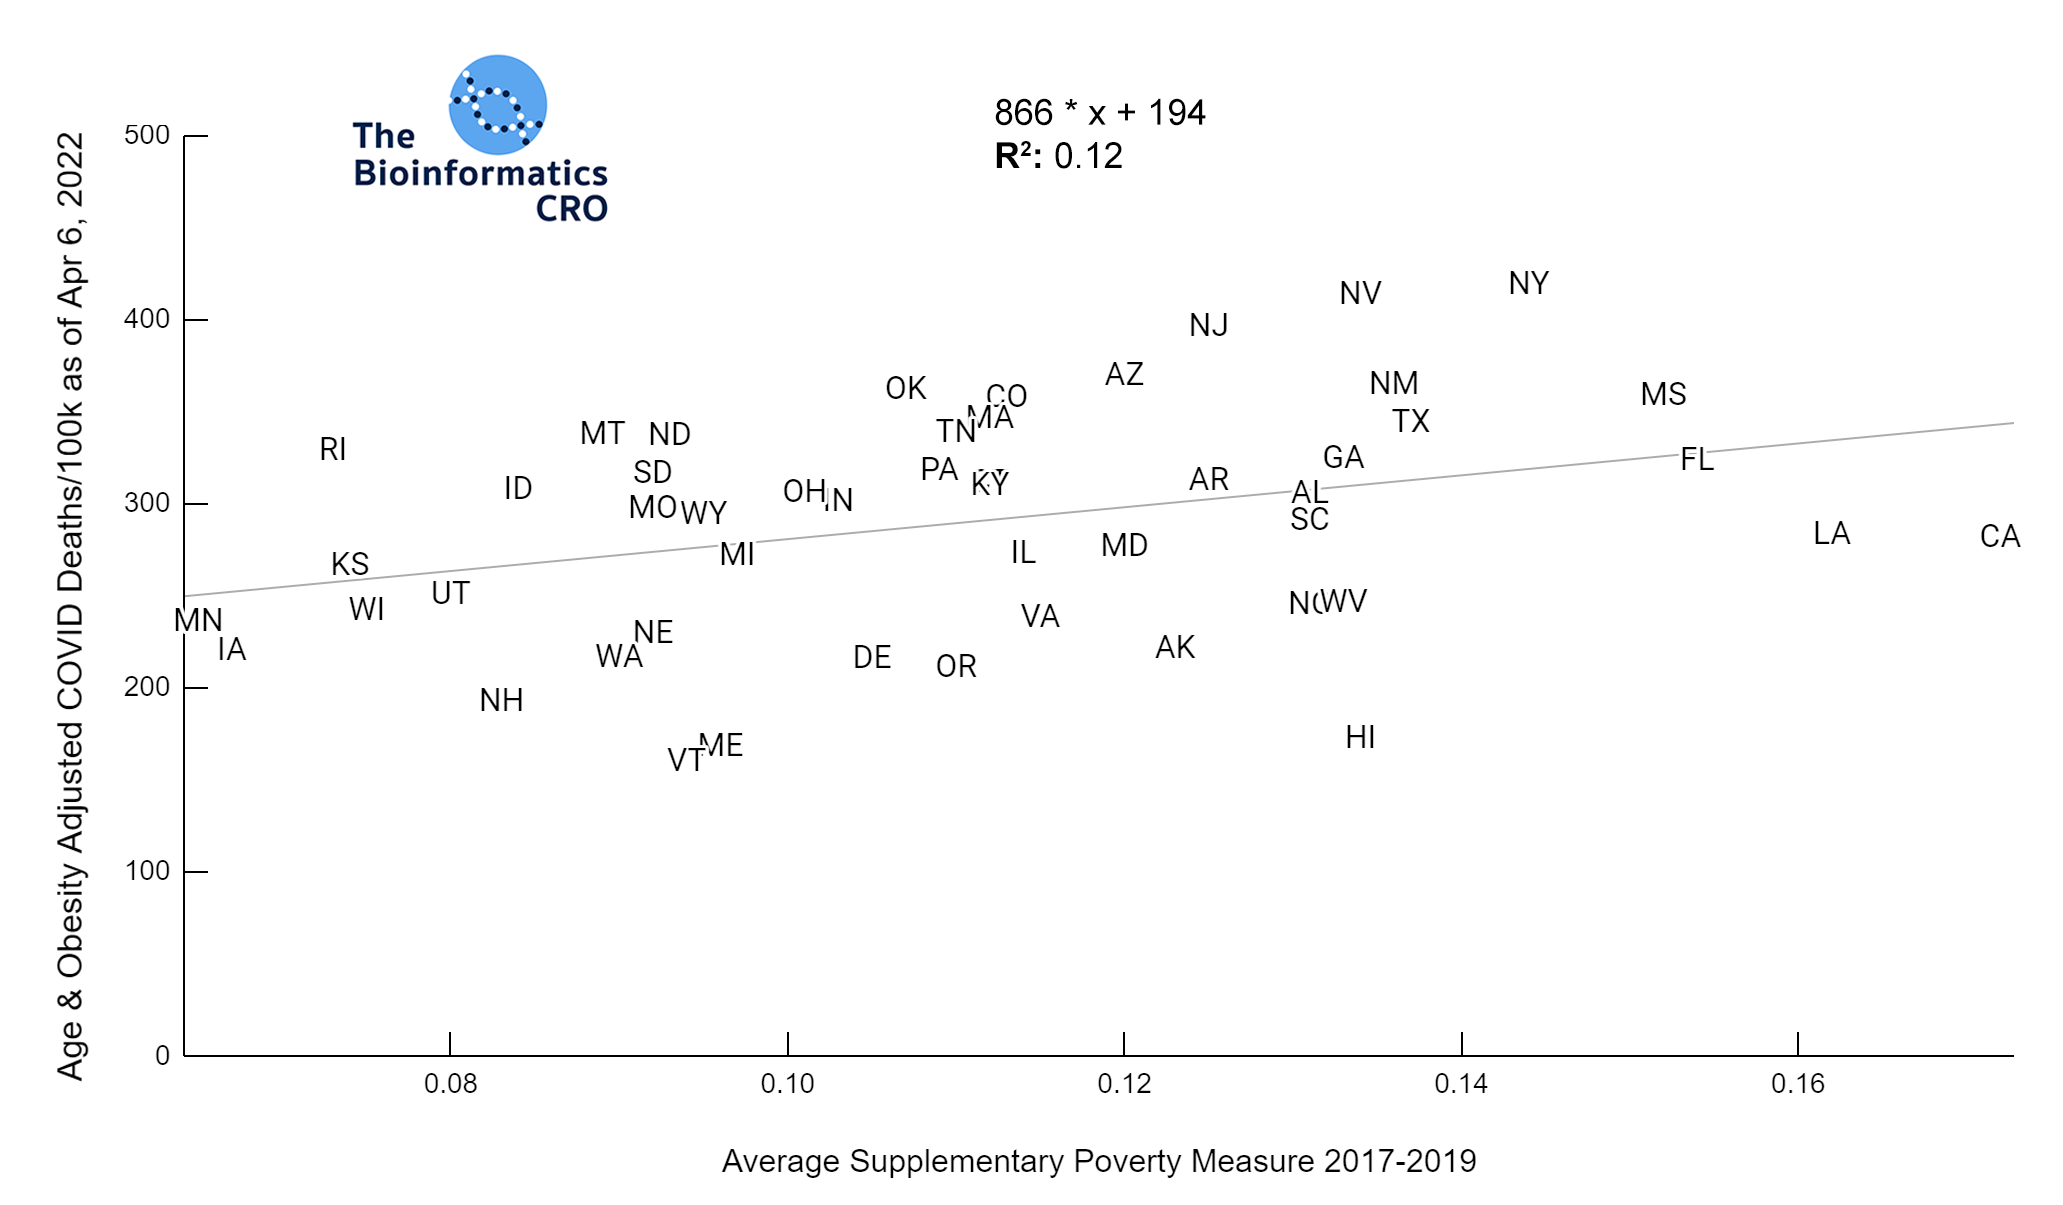 Supplementary Poverty Measure vs Obesity & Age-Adjusted Deaths | y=866x+194 | R^2: 0.12